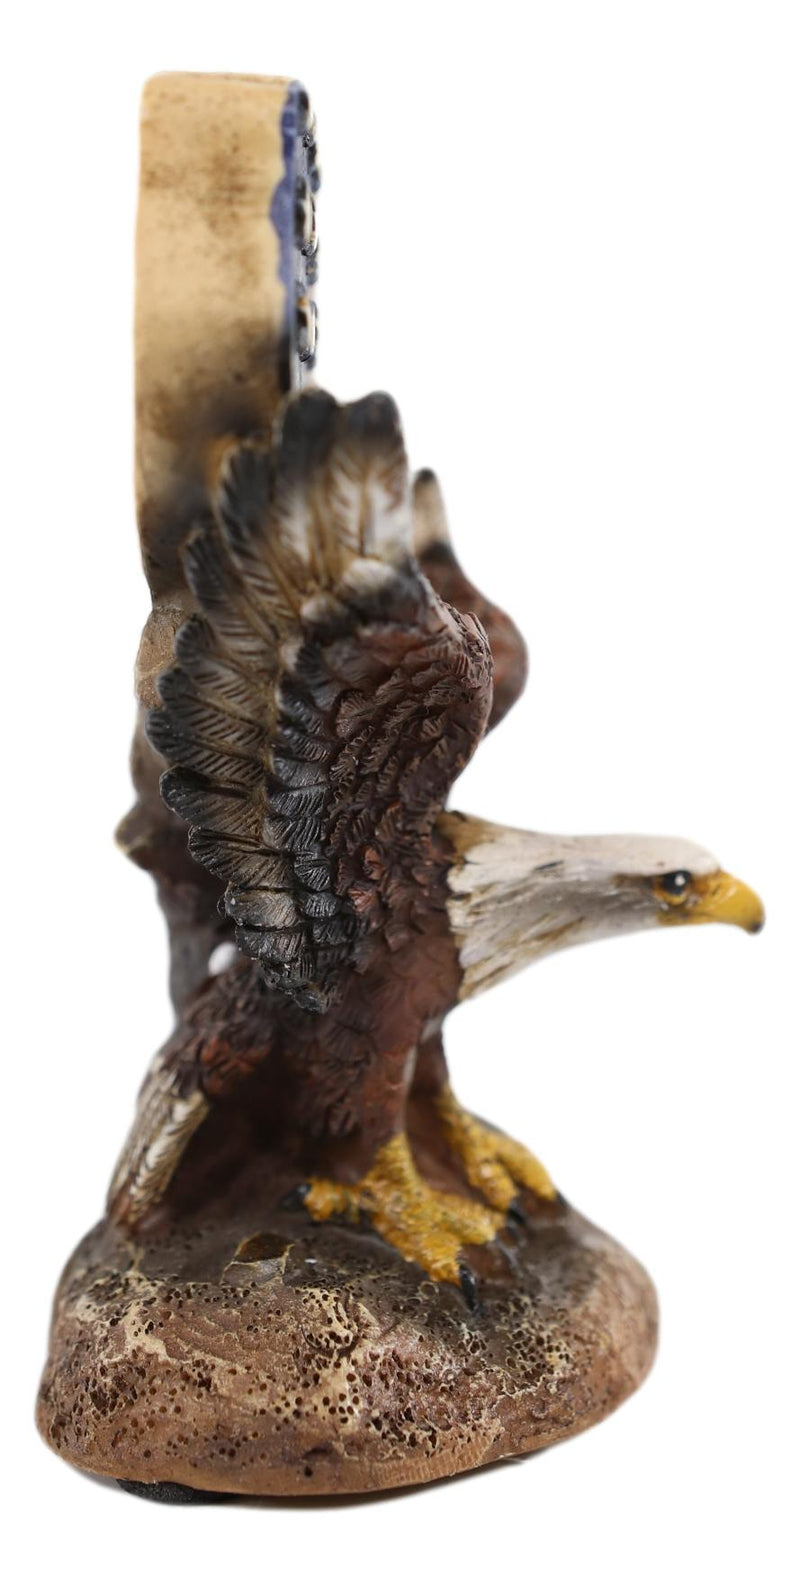 Patriotic Bald Eagle Soaring By American Map Cutout In USA Flag Colors Figurine